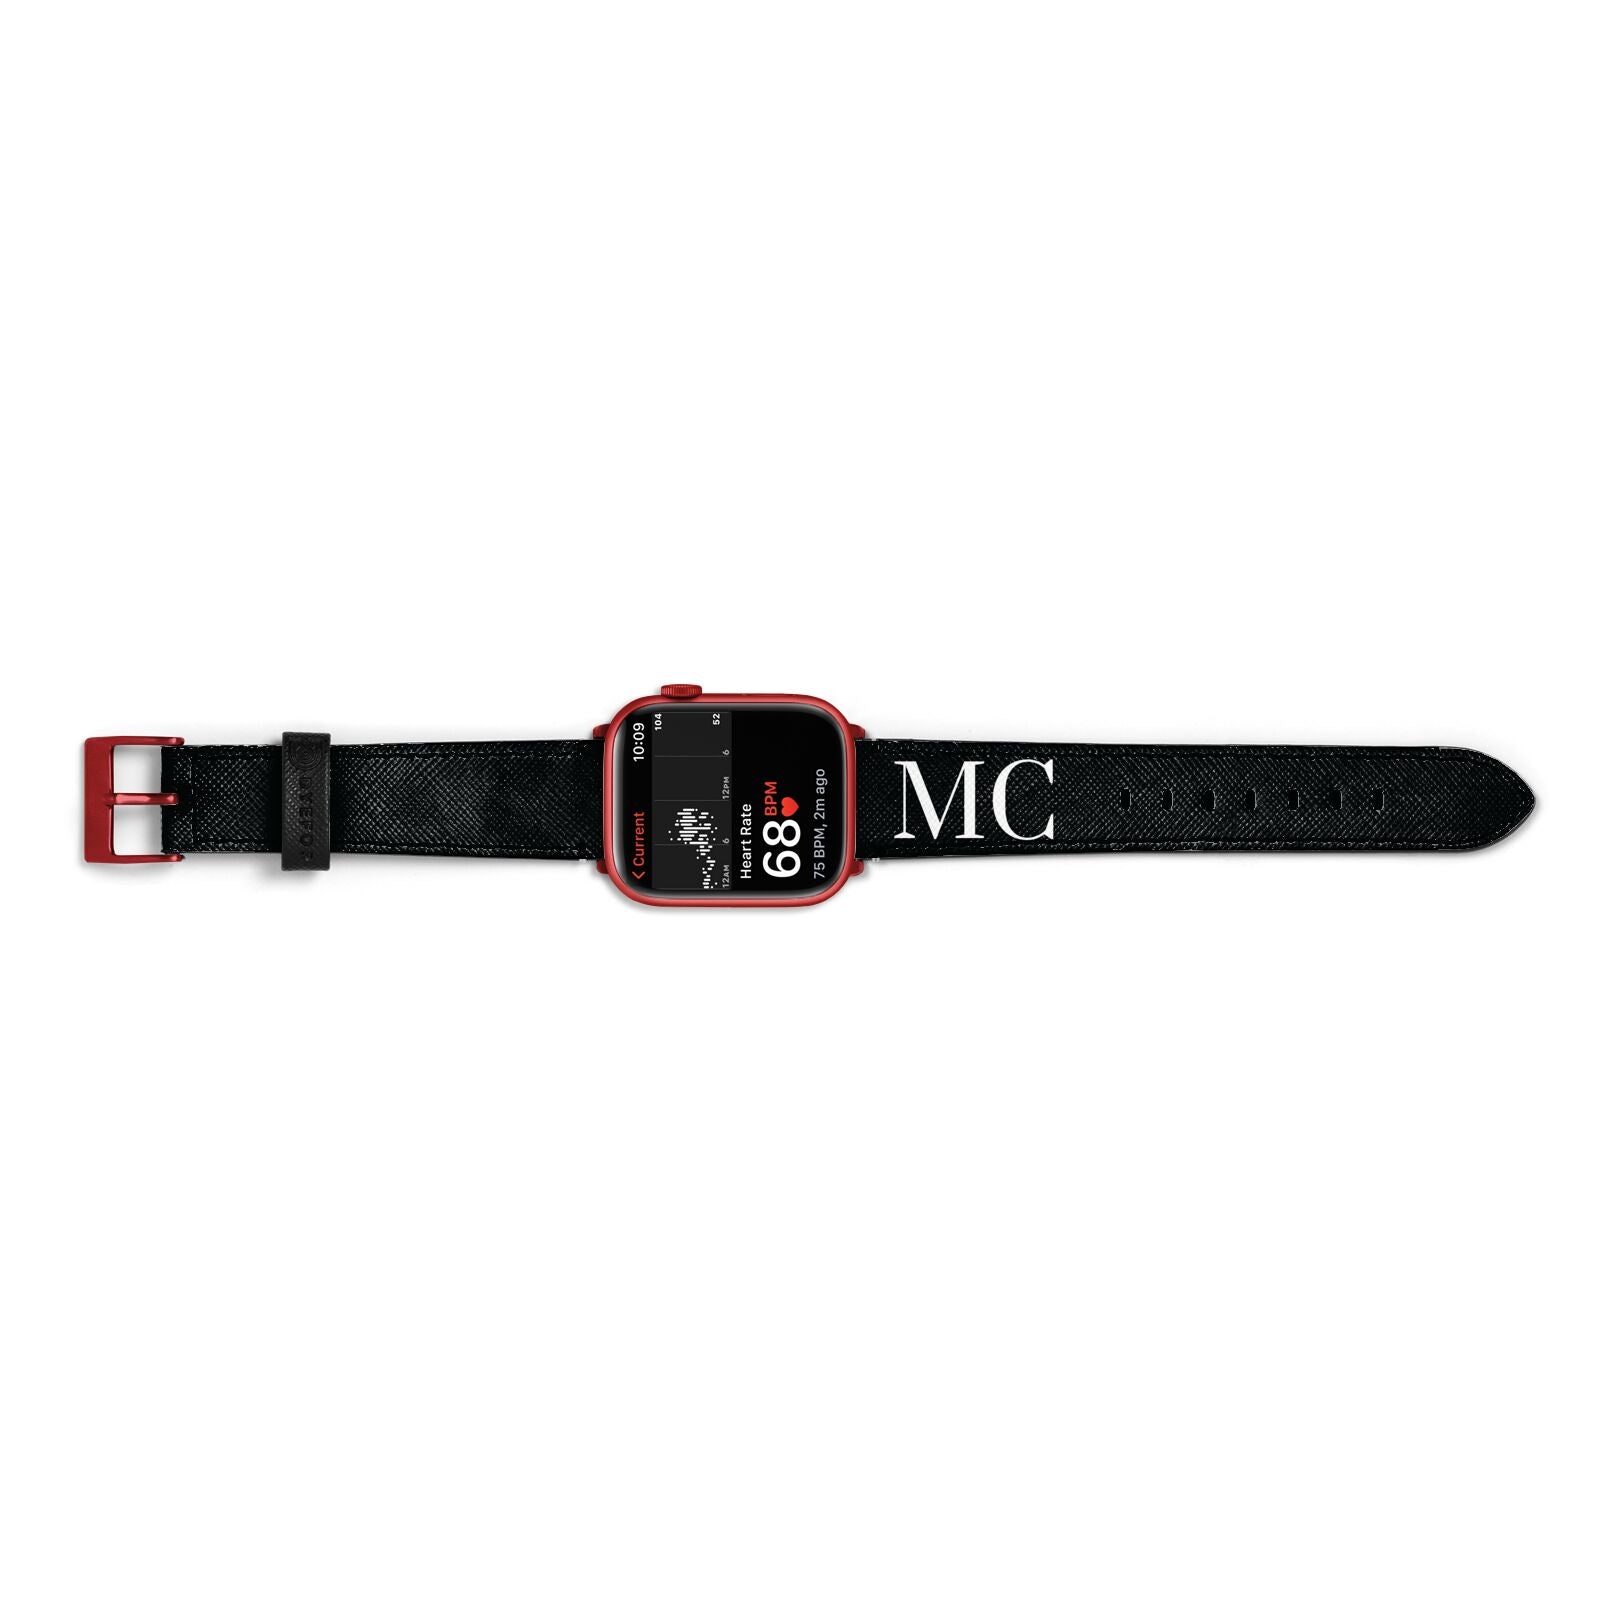 Initials Personalised 1 Apple Watch Strap Size 38mm Landscape Image Red Hardware